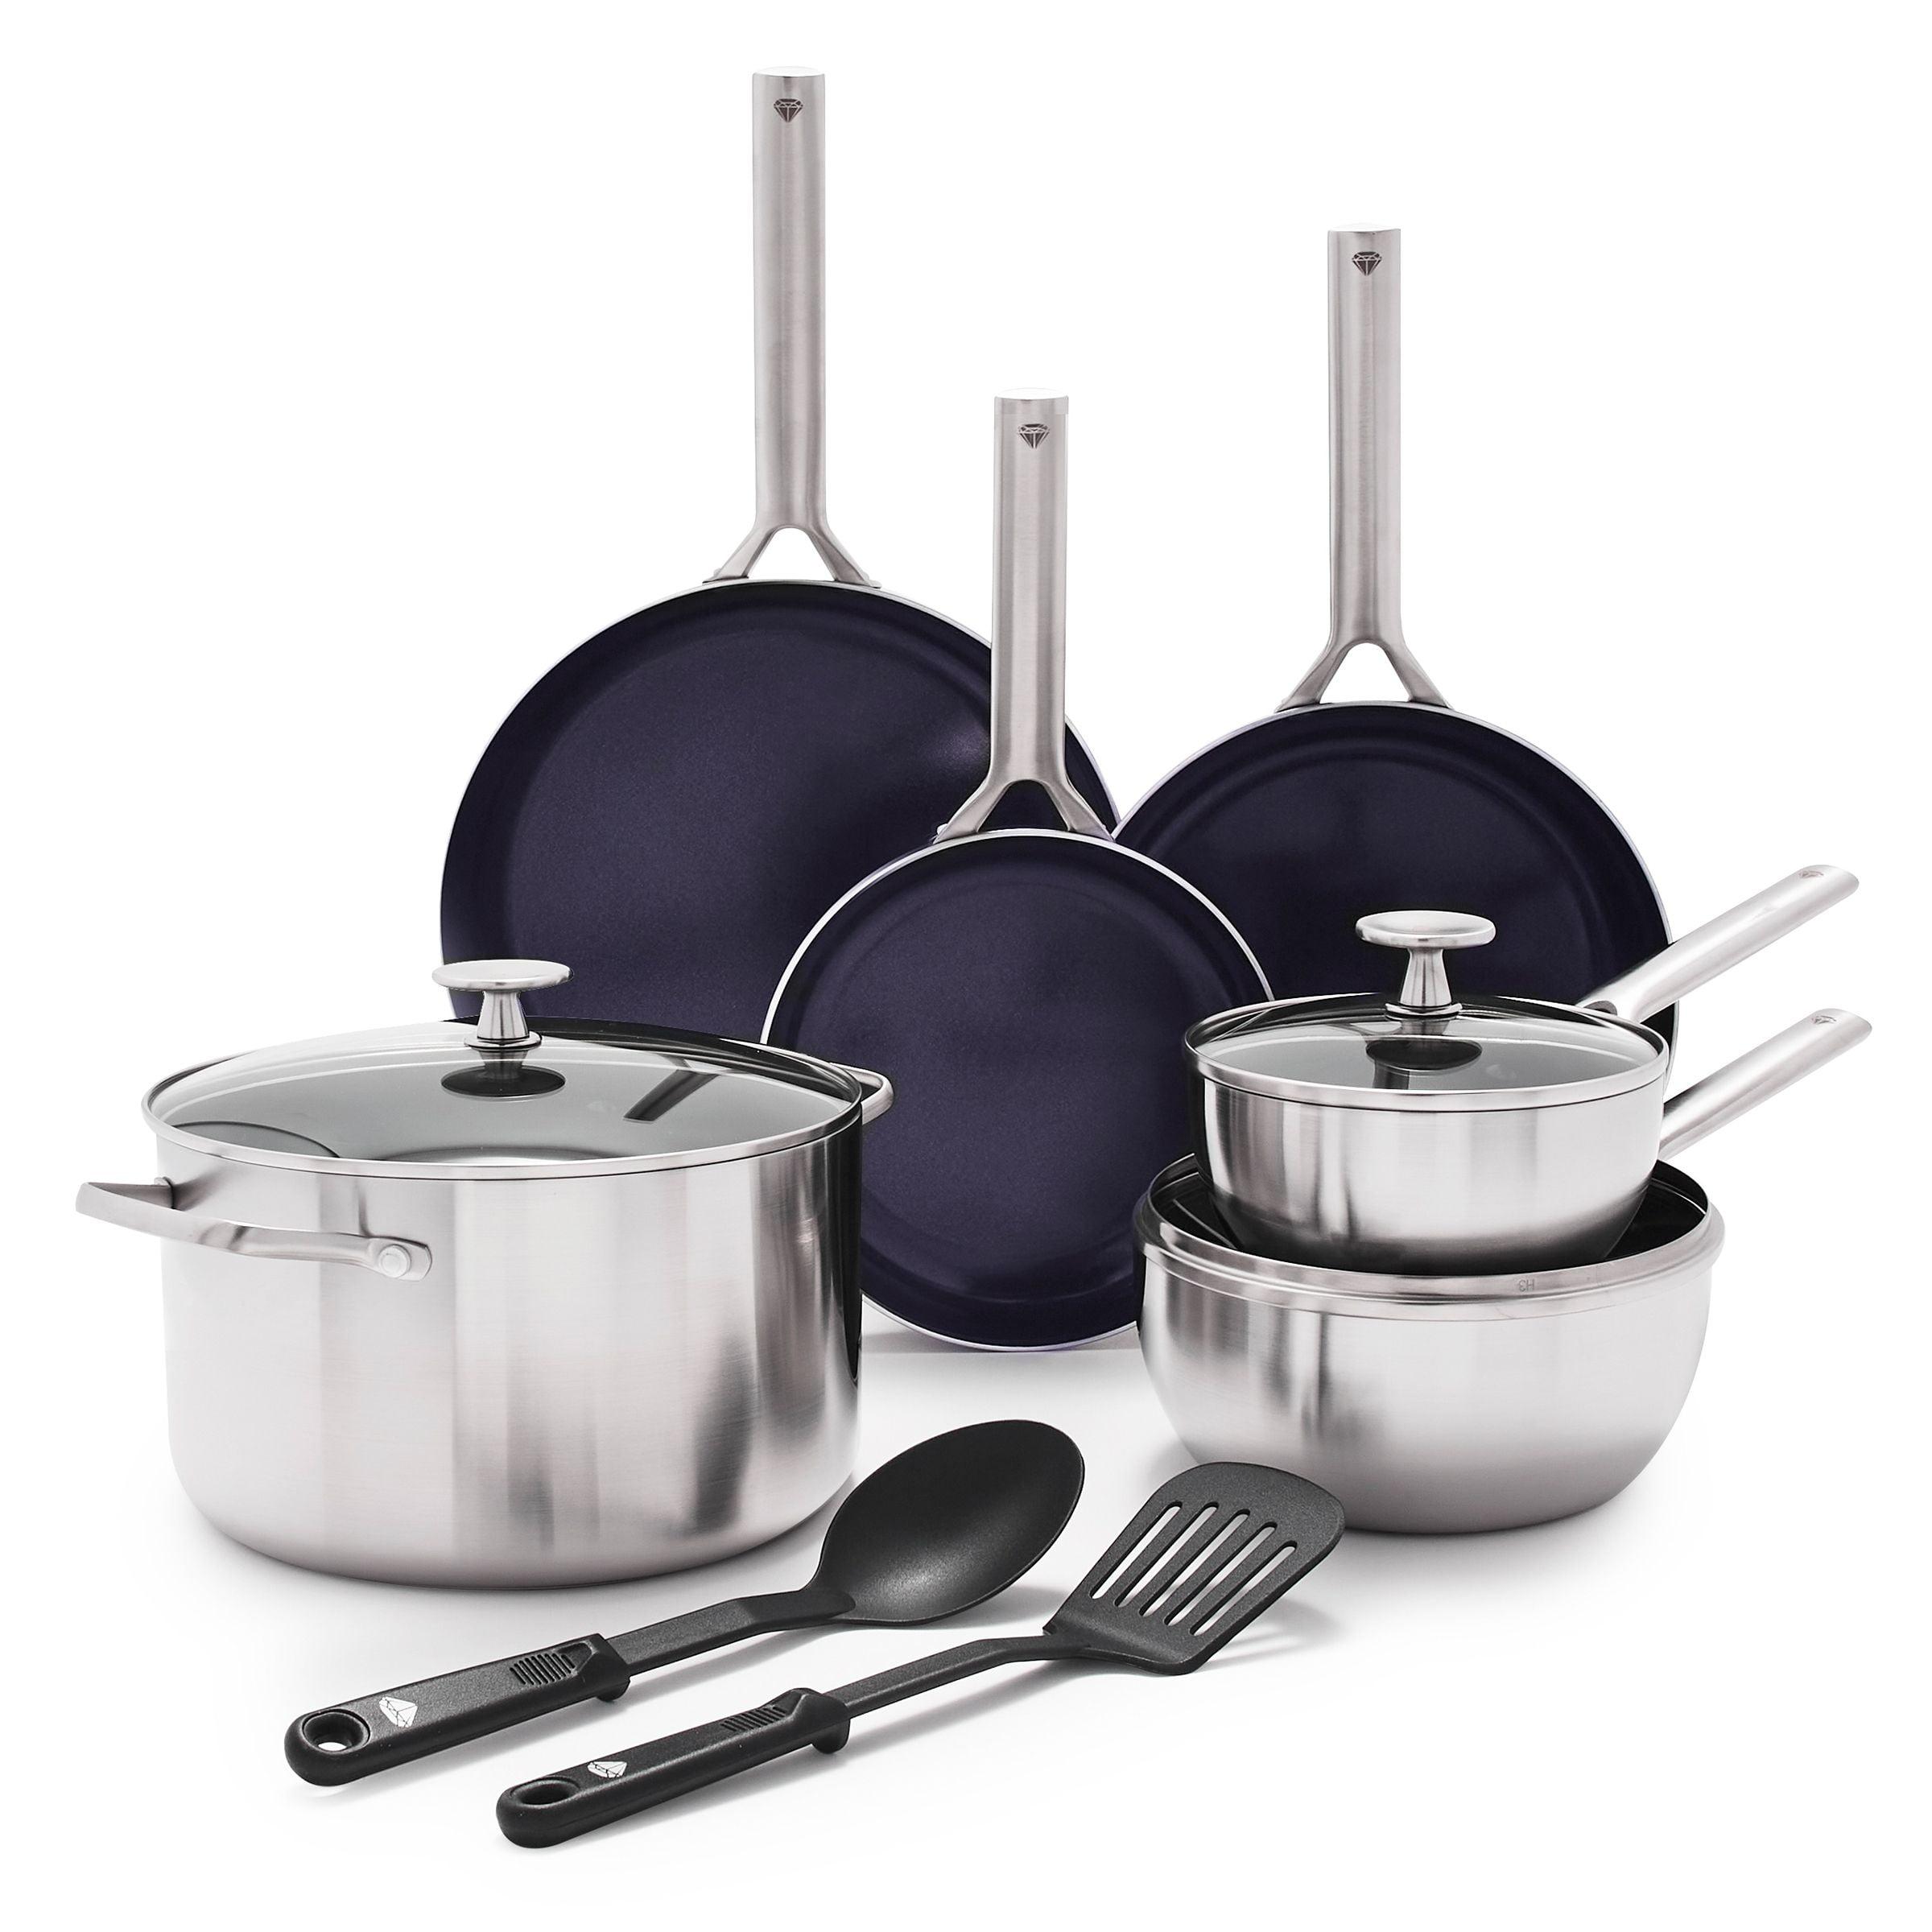 11-Piece Stainless Steel and Aluminum Nonstick Cookware Set